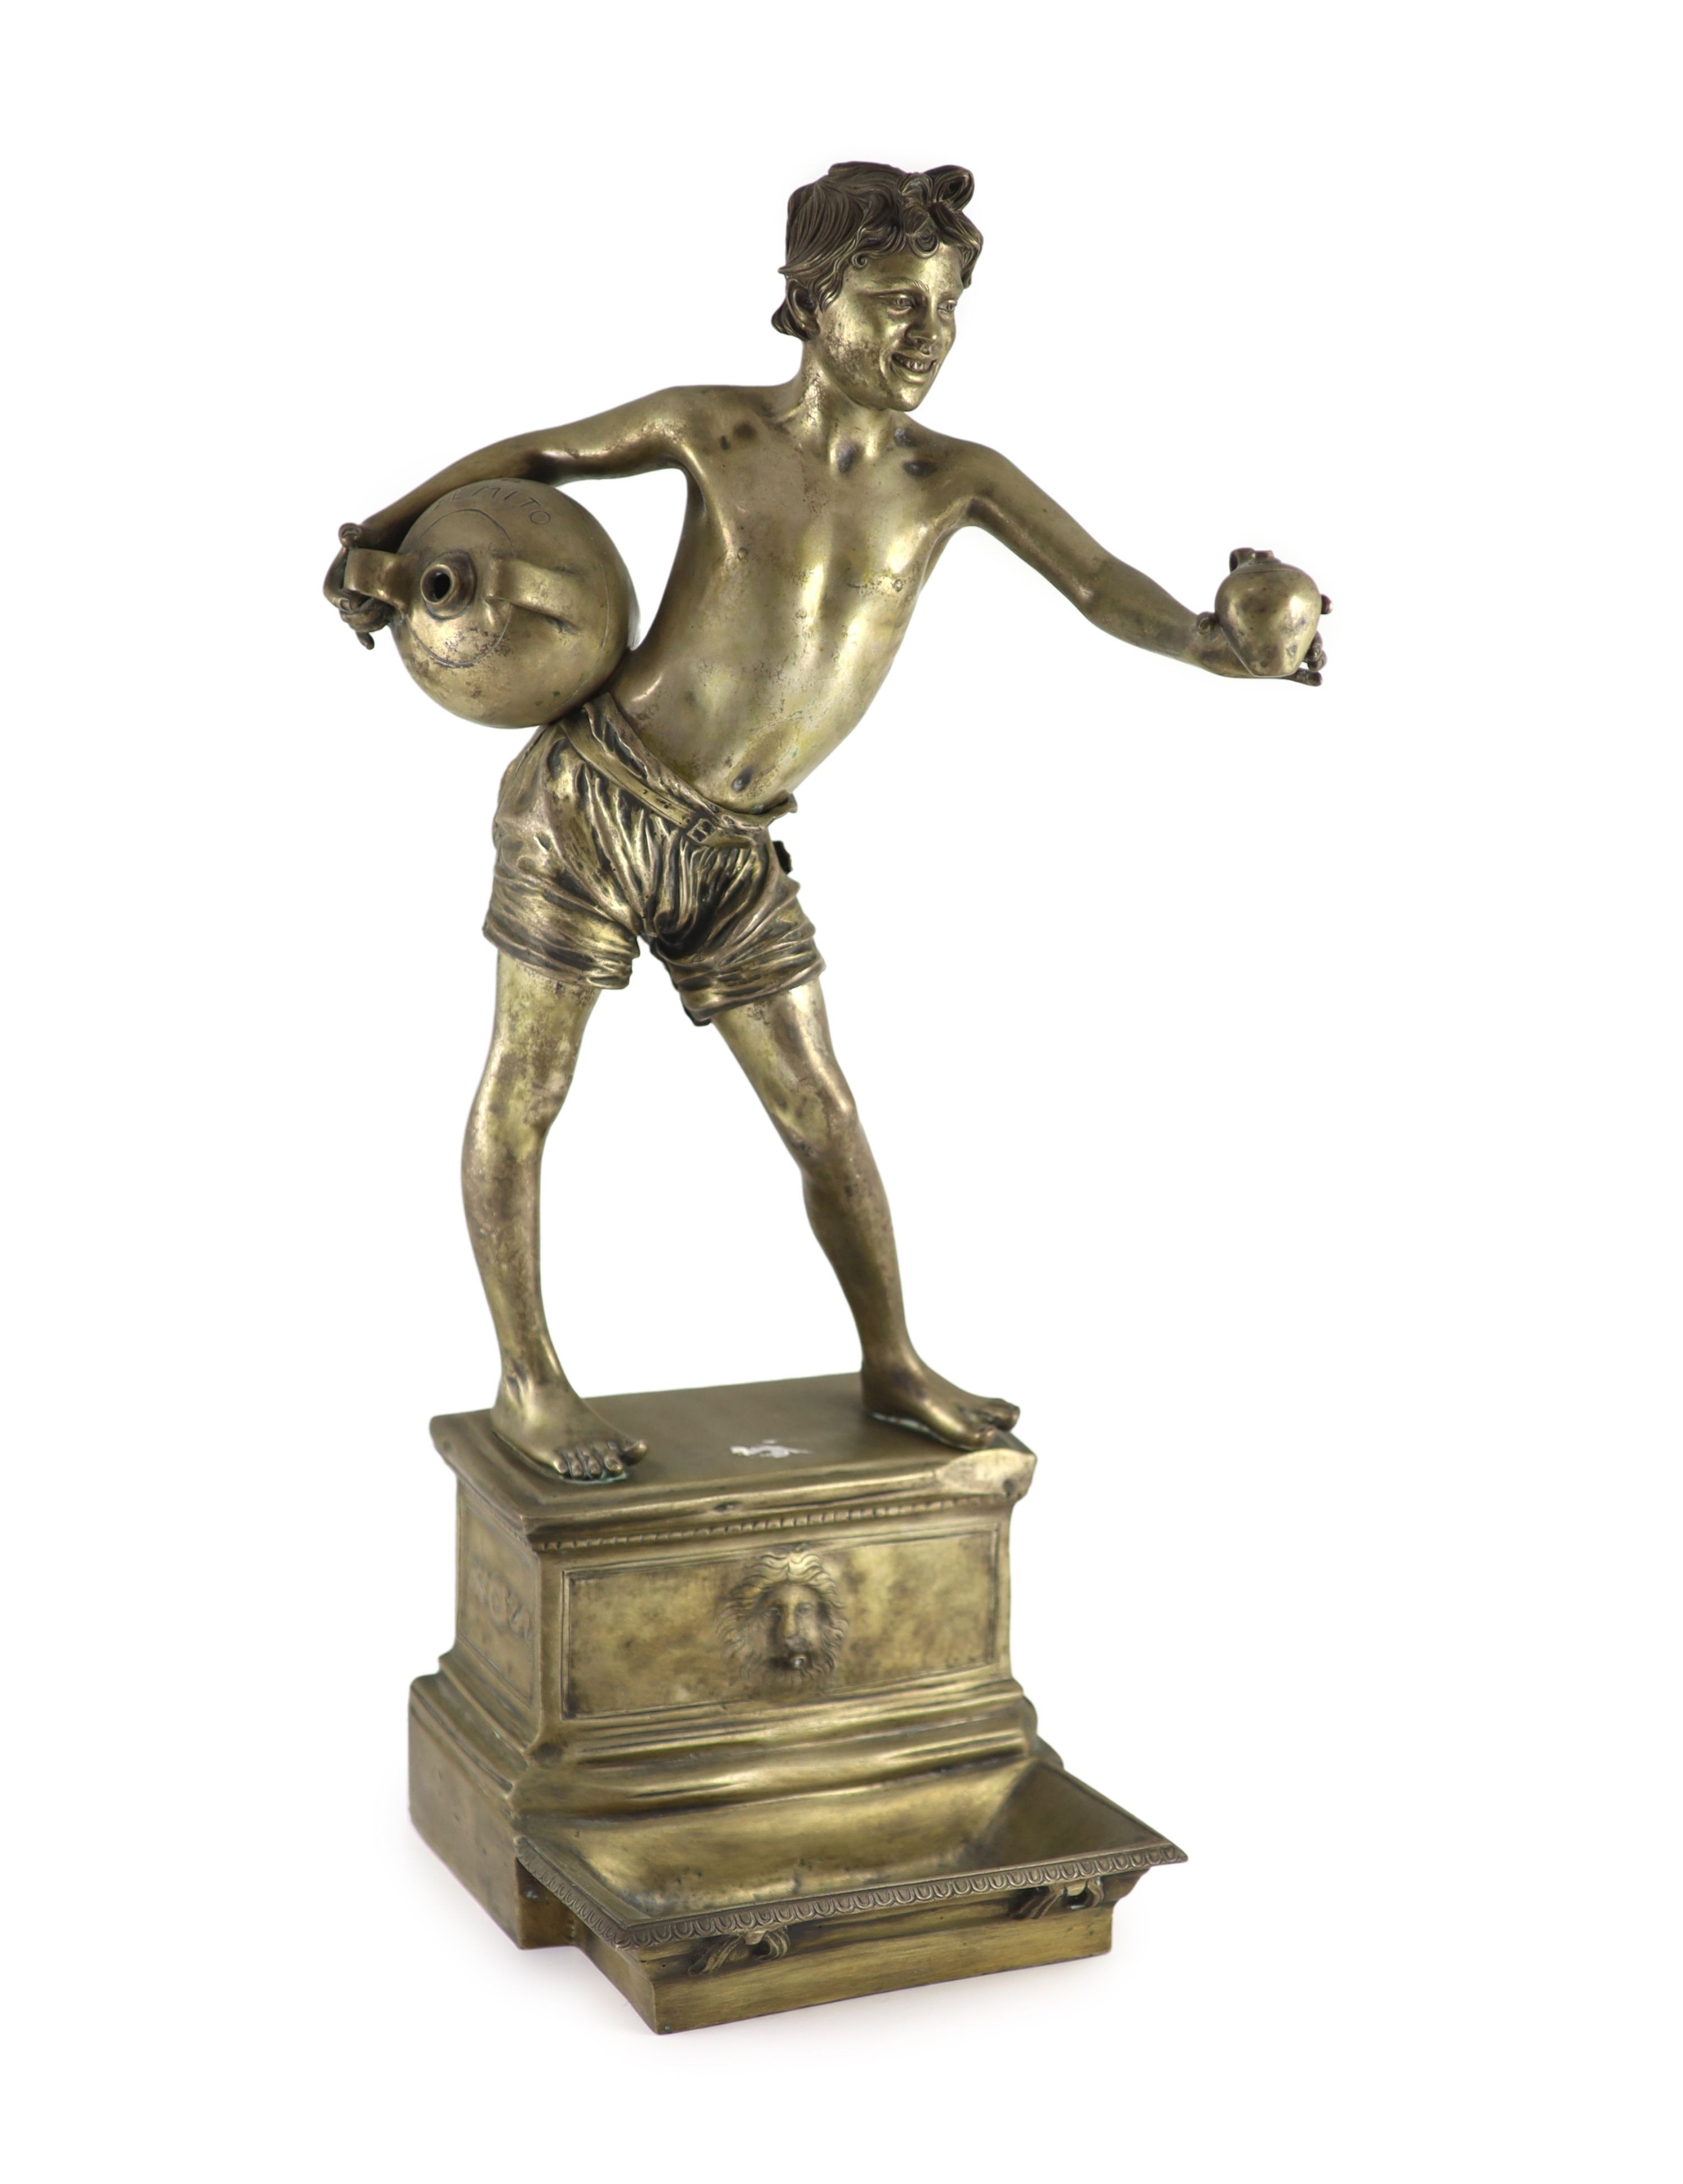 Vincenzo Gemito (Italian 1852-1929): 'L'Acquaiolo' (The Water Carrier), a bronze figural sculpture, foundry mark, height 52cm